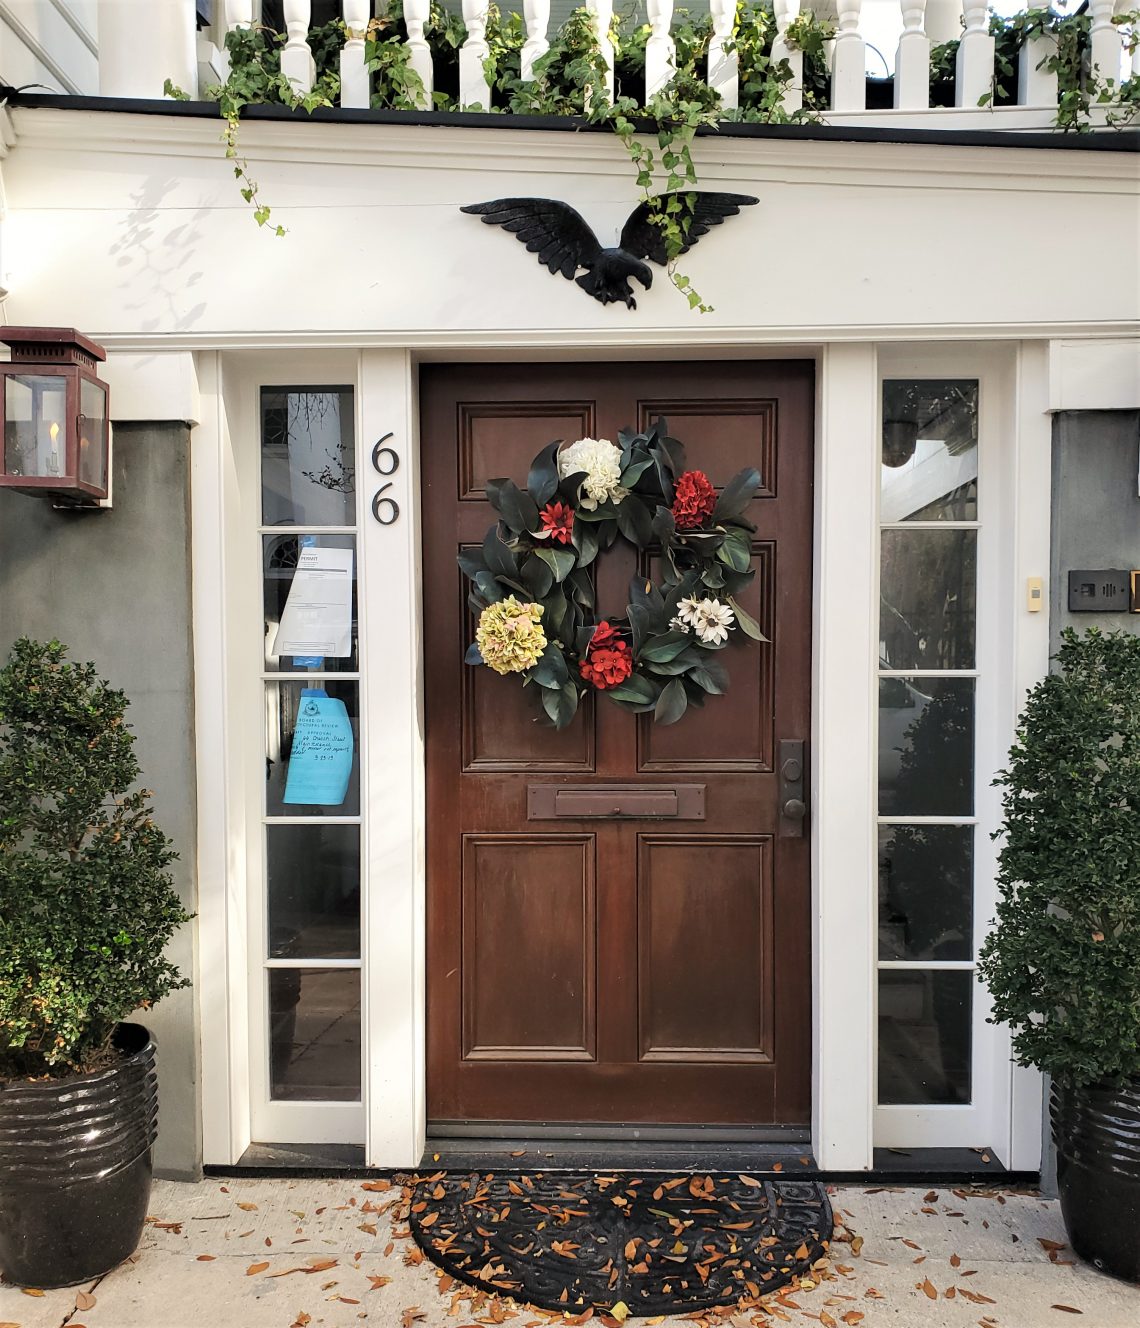 This wreath festooned door can be found on a house built in 1784 on Church Street.